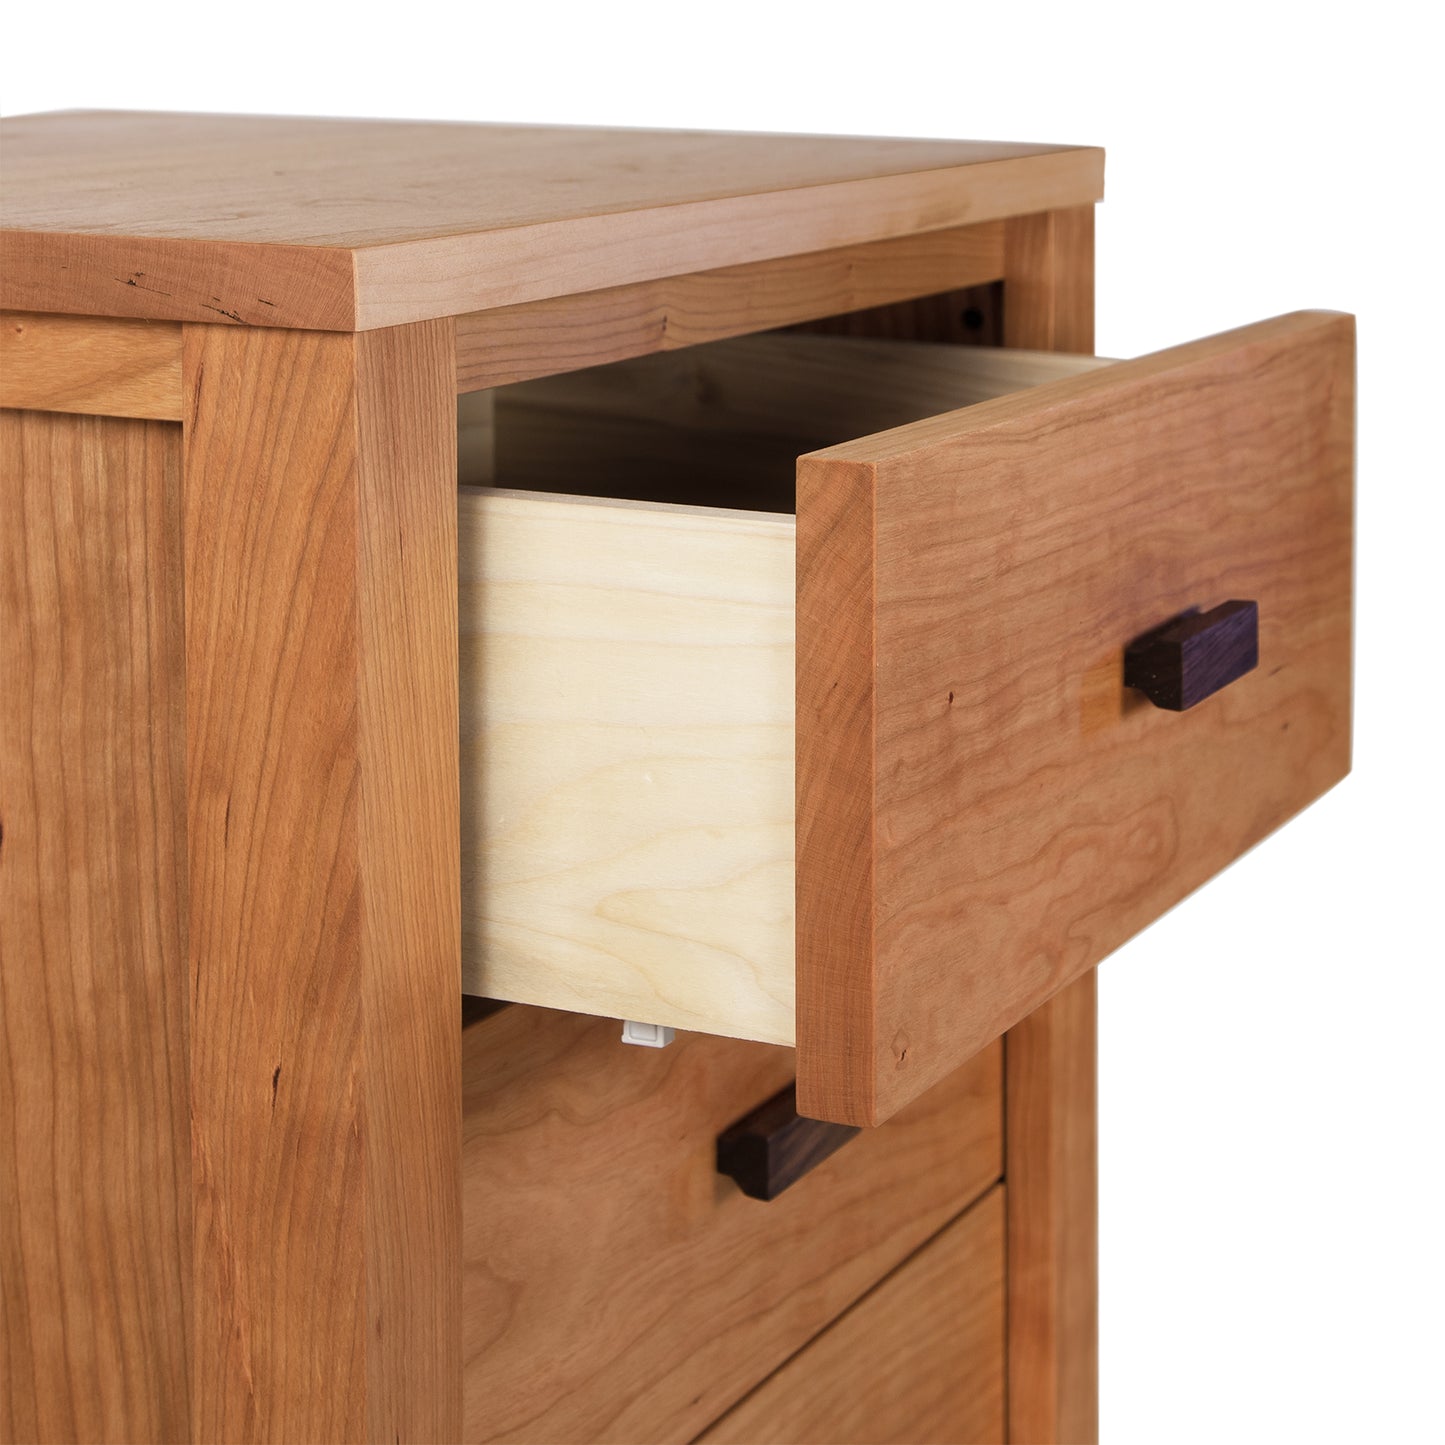 An eco-friendly wooden cabinet with an open drawer showing its light-colored interior, featuring a simple, modern design with a distinct square handle. The Andover Modern 3-Drawer Nightstand by Maple Corner Woodworks.